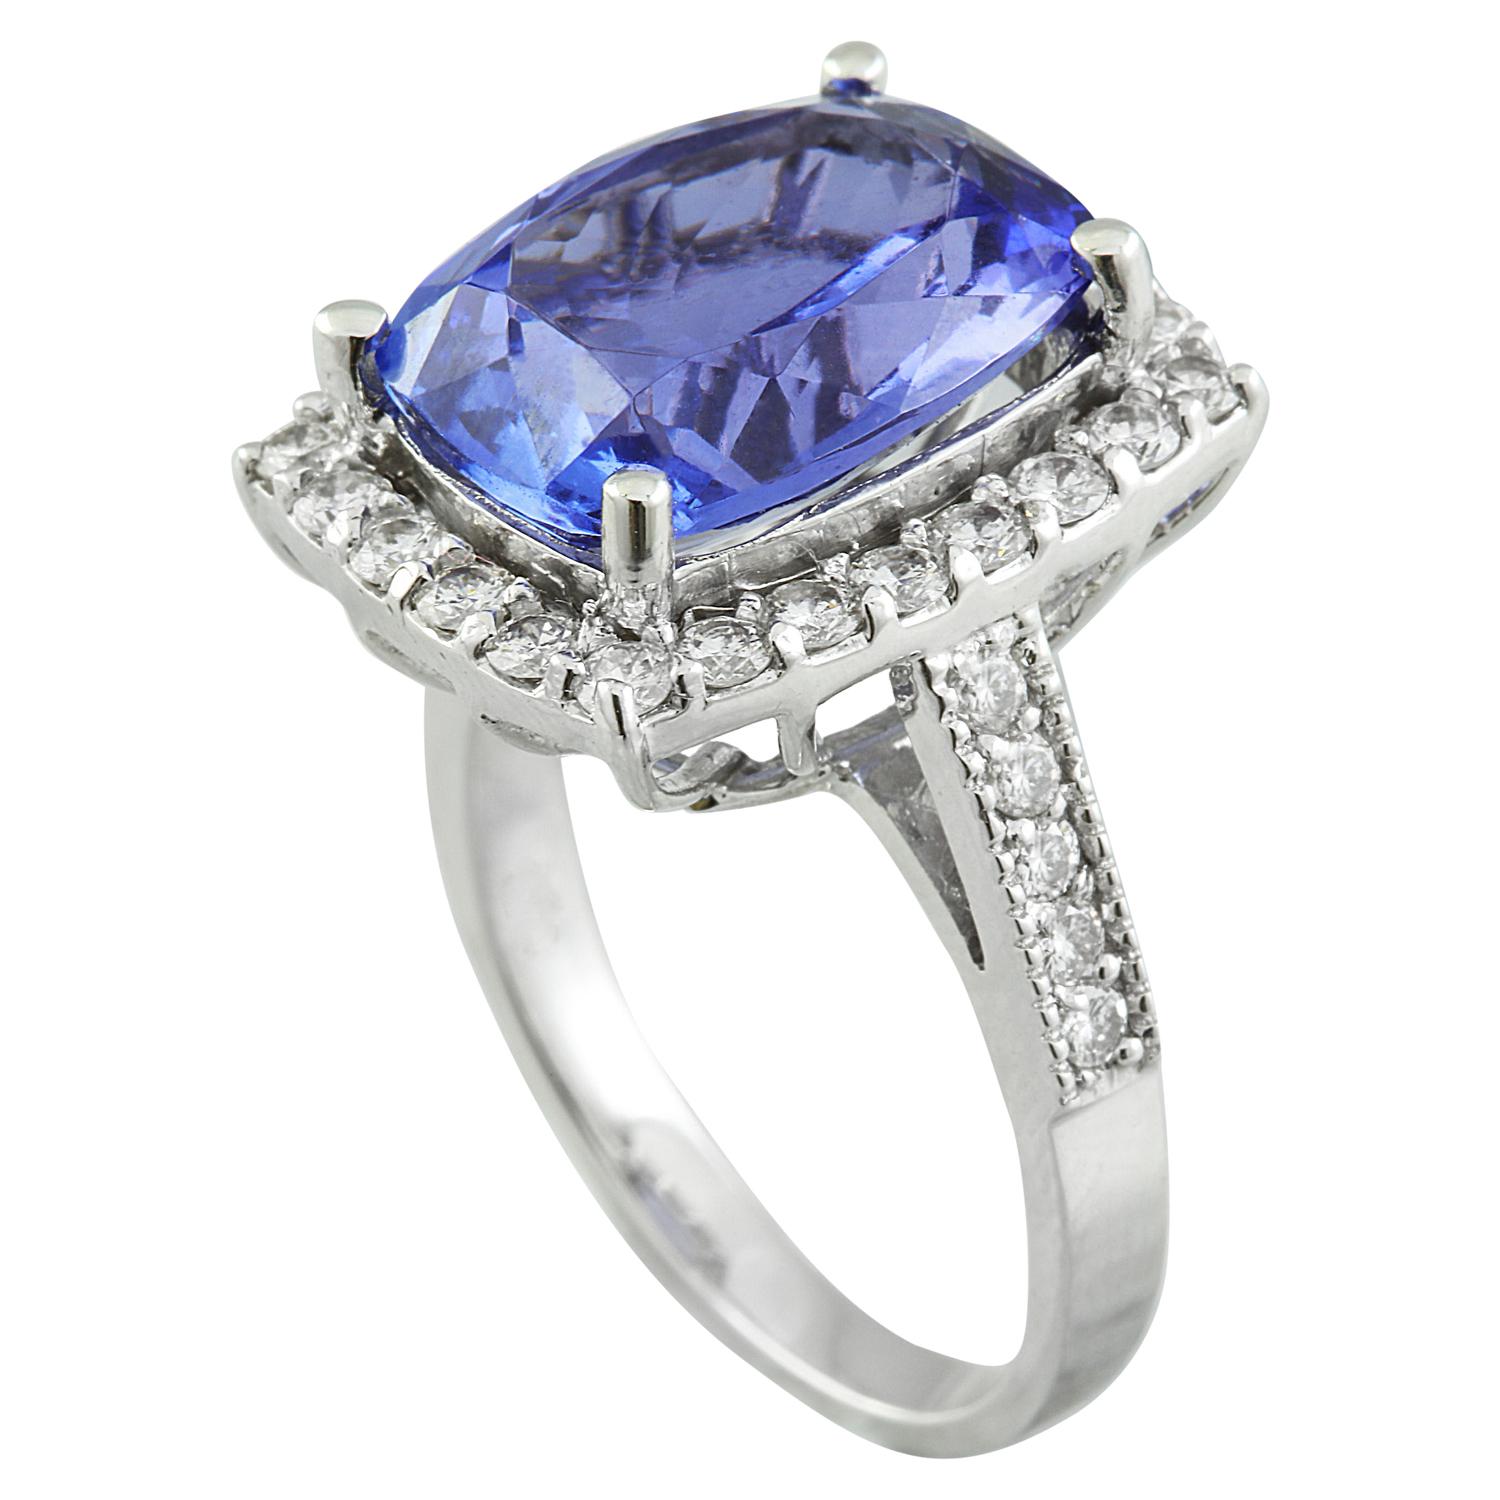 8.55 Carat Natural Tanzanite 14 Karat Solid White Gold Diamond Ring
Stamped: 14K 
Total Ring Weight: 6 Grams 
Tanzanite Weight: 7.65 Carat (14.00x10.00 Millimeters) 
Diamond Weight: 0.90 Carat (F-G Color, VS2-SI1 Clarity )
Face Measures: 17.15x13.80